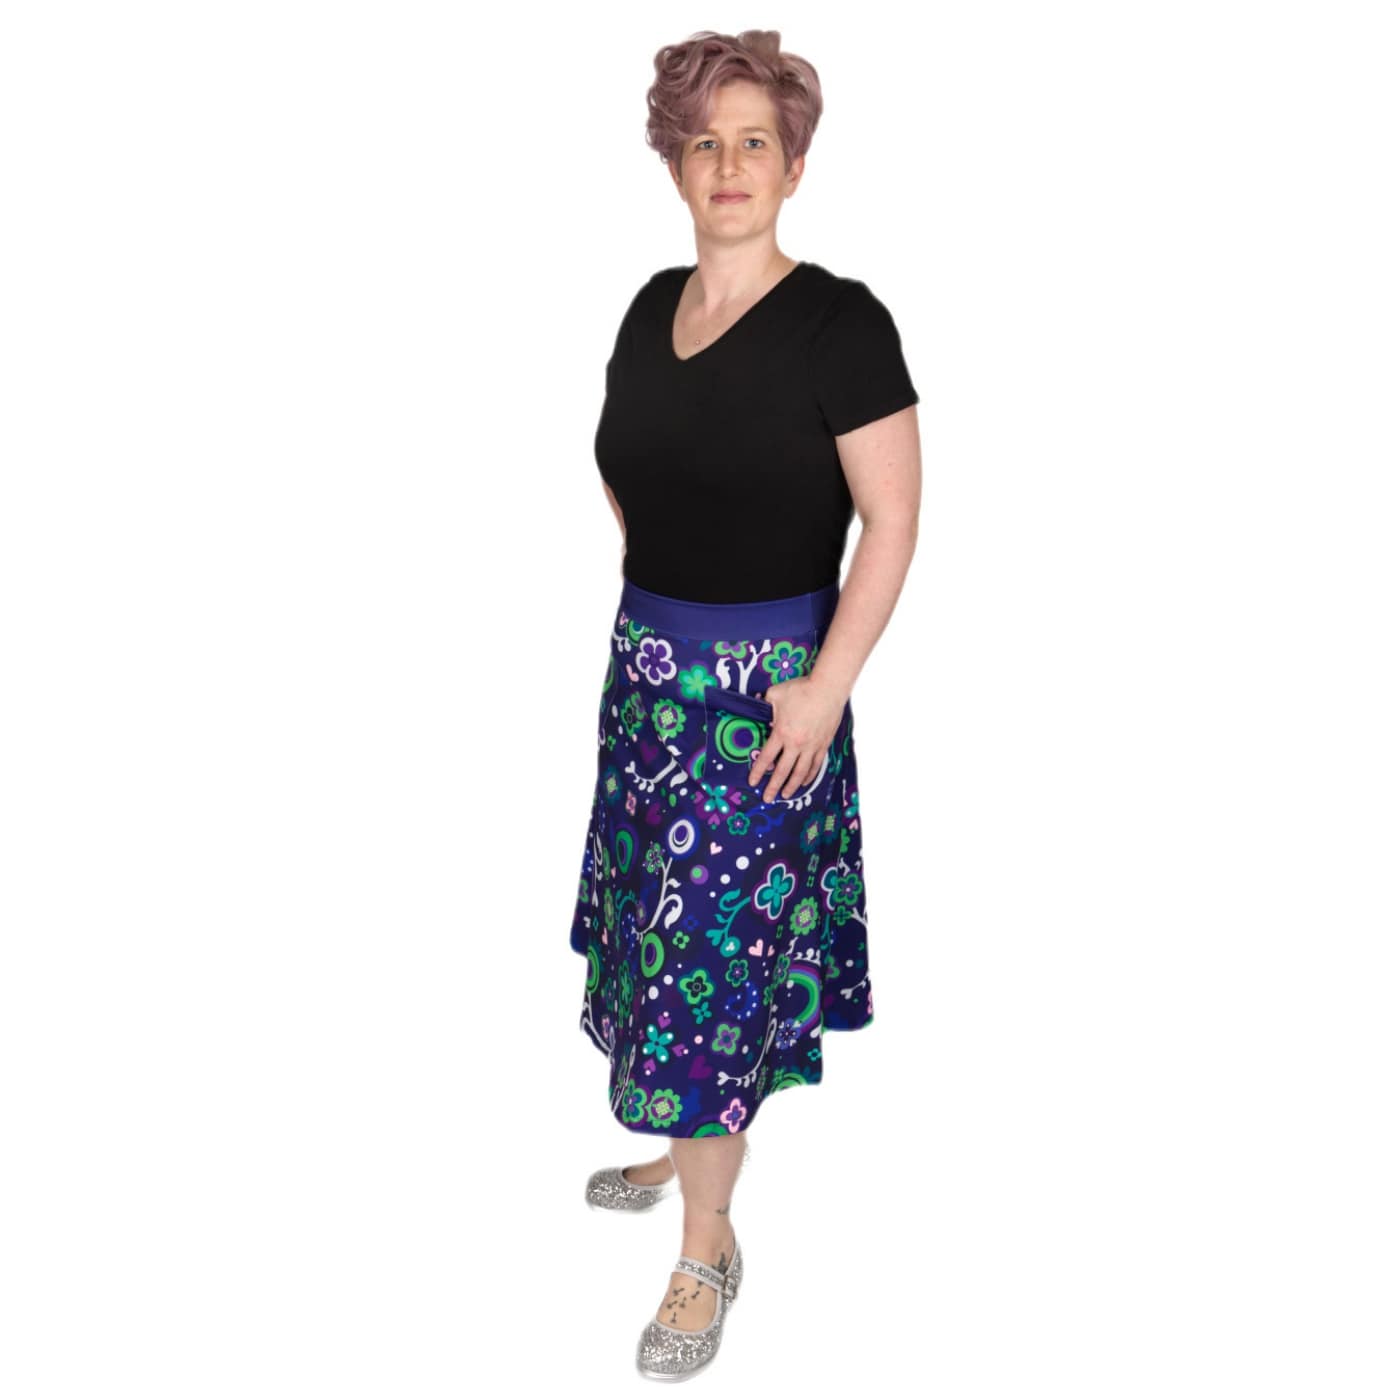 Groovy Enchantment Original Skirt by RainbowsAndFairies.com.au (Psychedelic - Woodstock - Festival - Kitsch - Skirt With Pockets - Vintage Inspired) - SKU: CL_OSKRT_GROOV_ENT - Pic-04